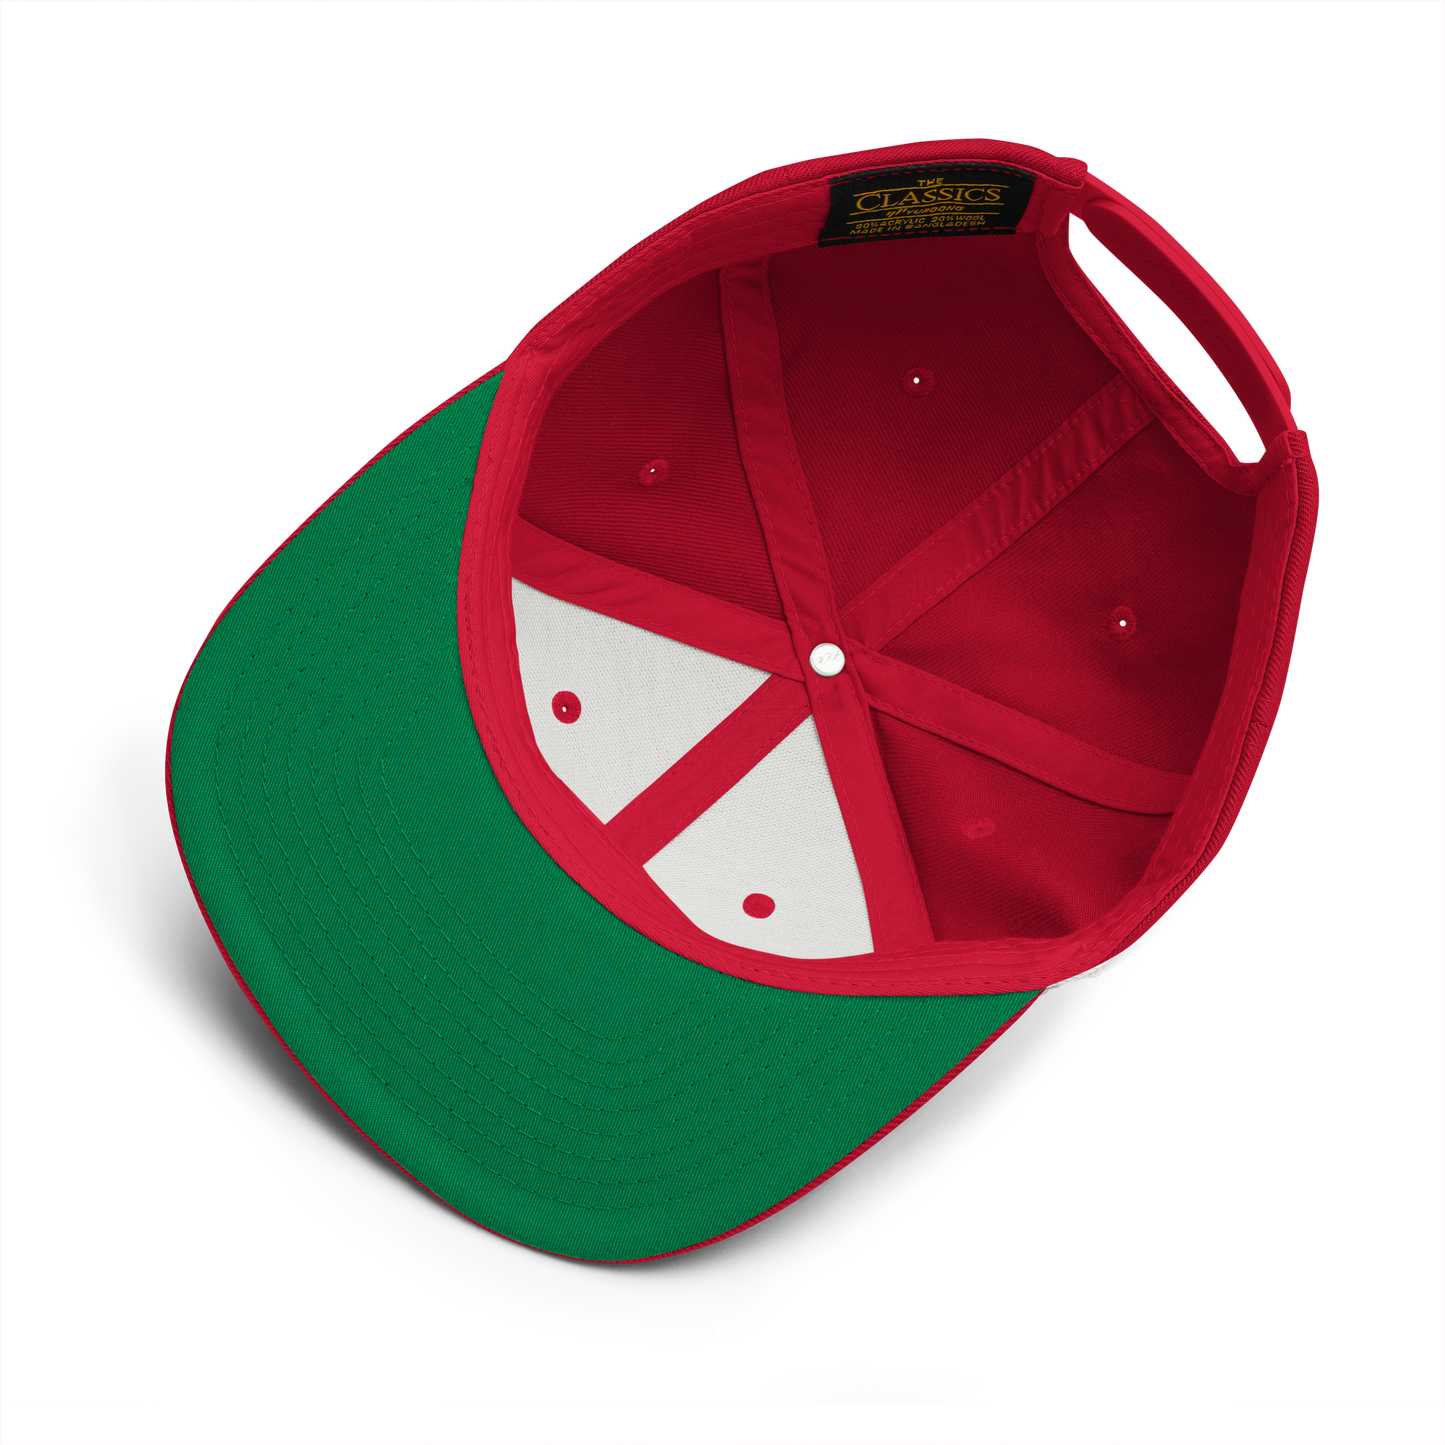 "Hal" Red Snapback Hat 3D Puff